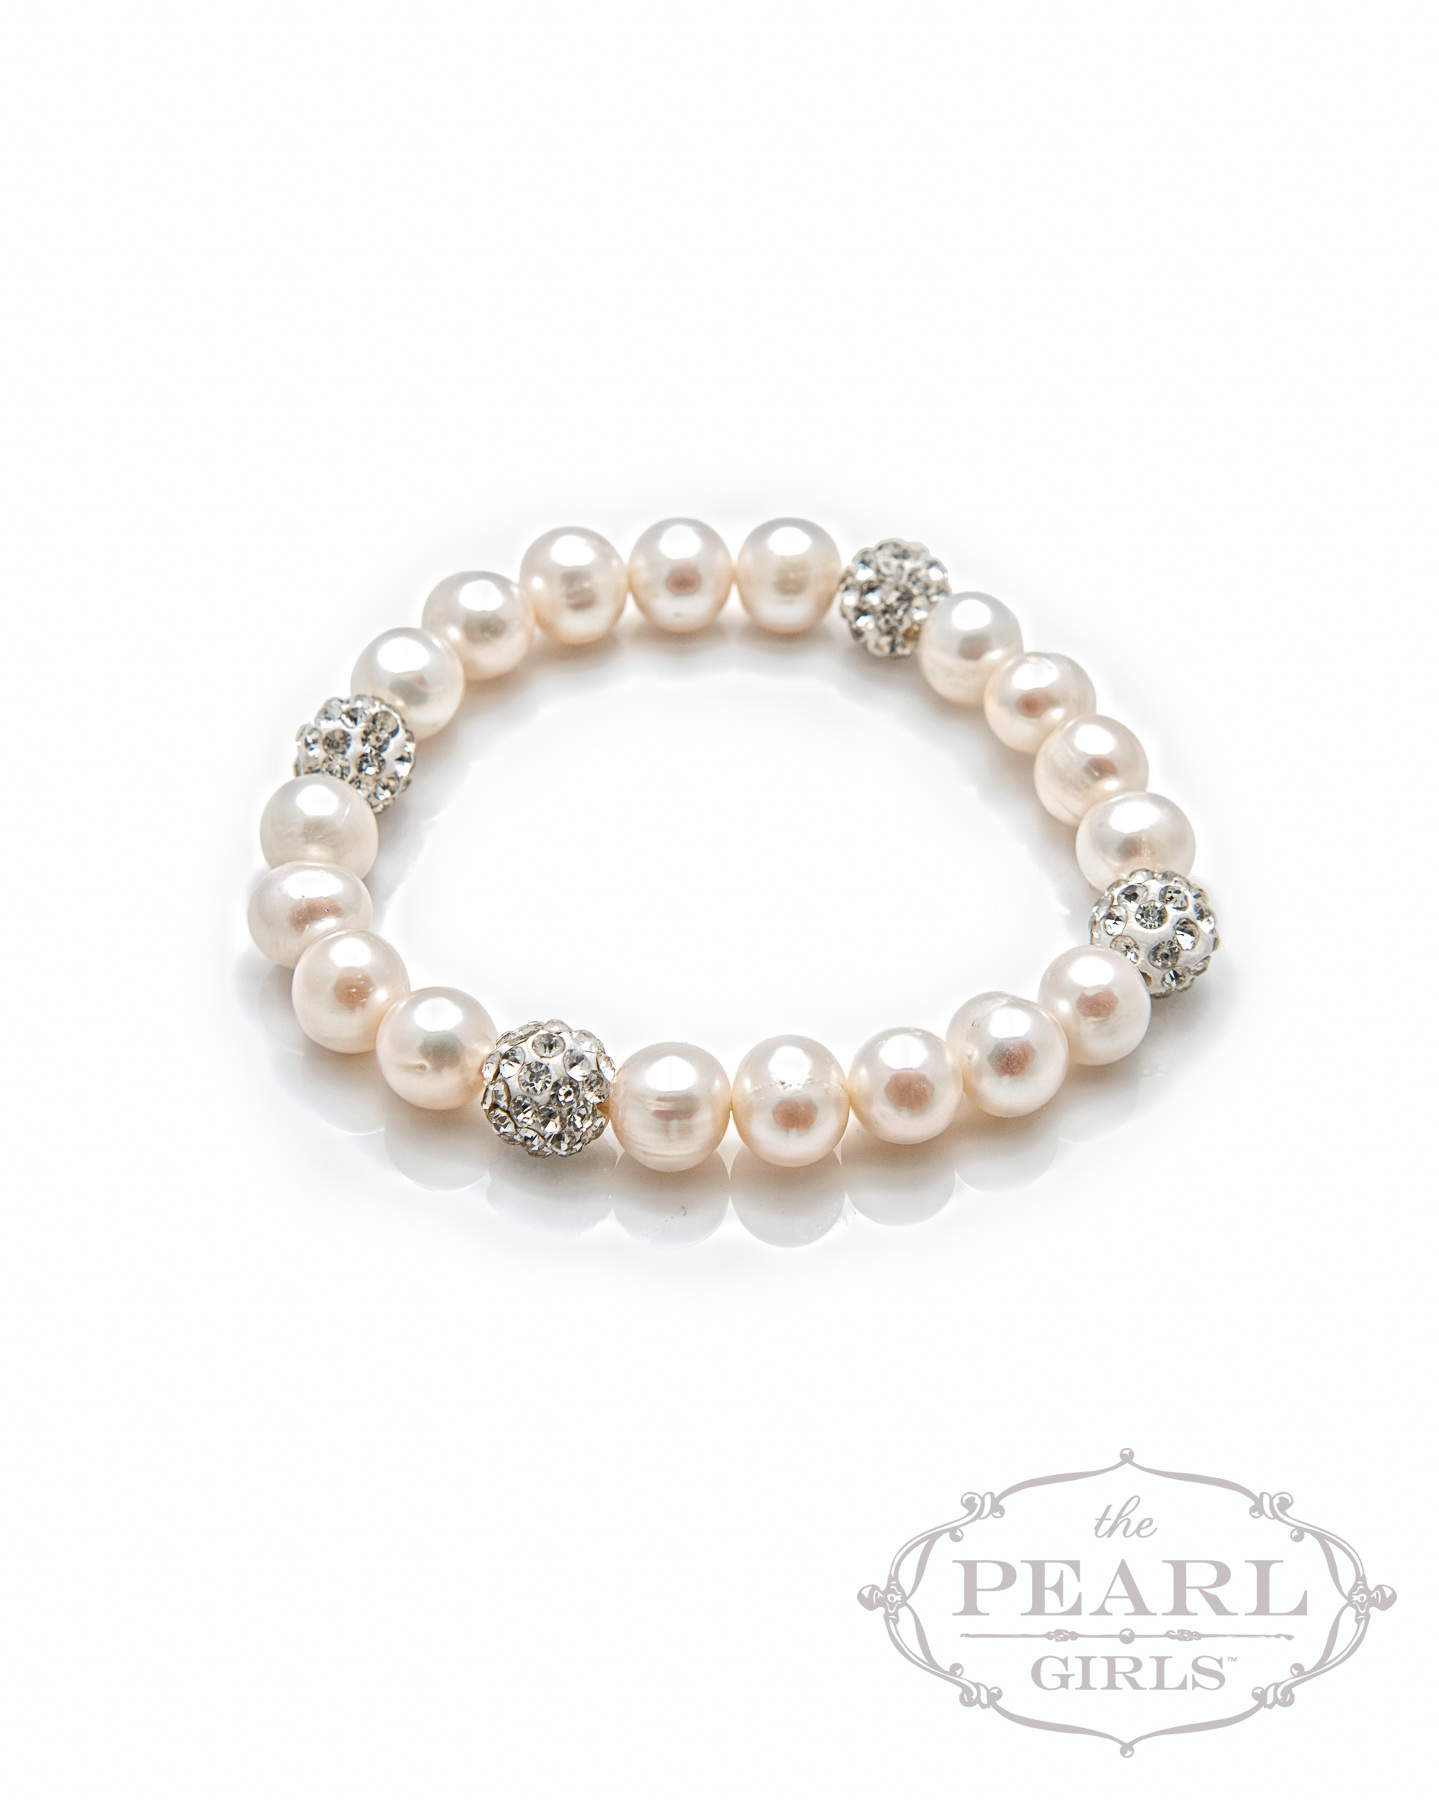 About Town Pearl Bracelet